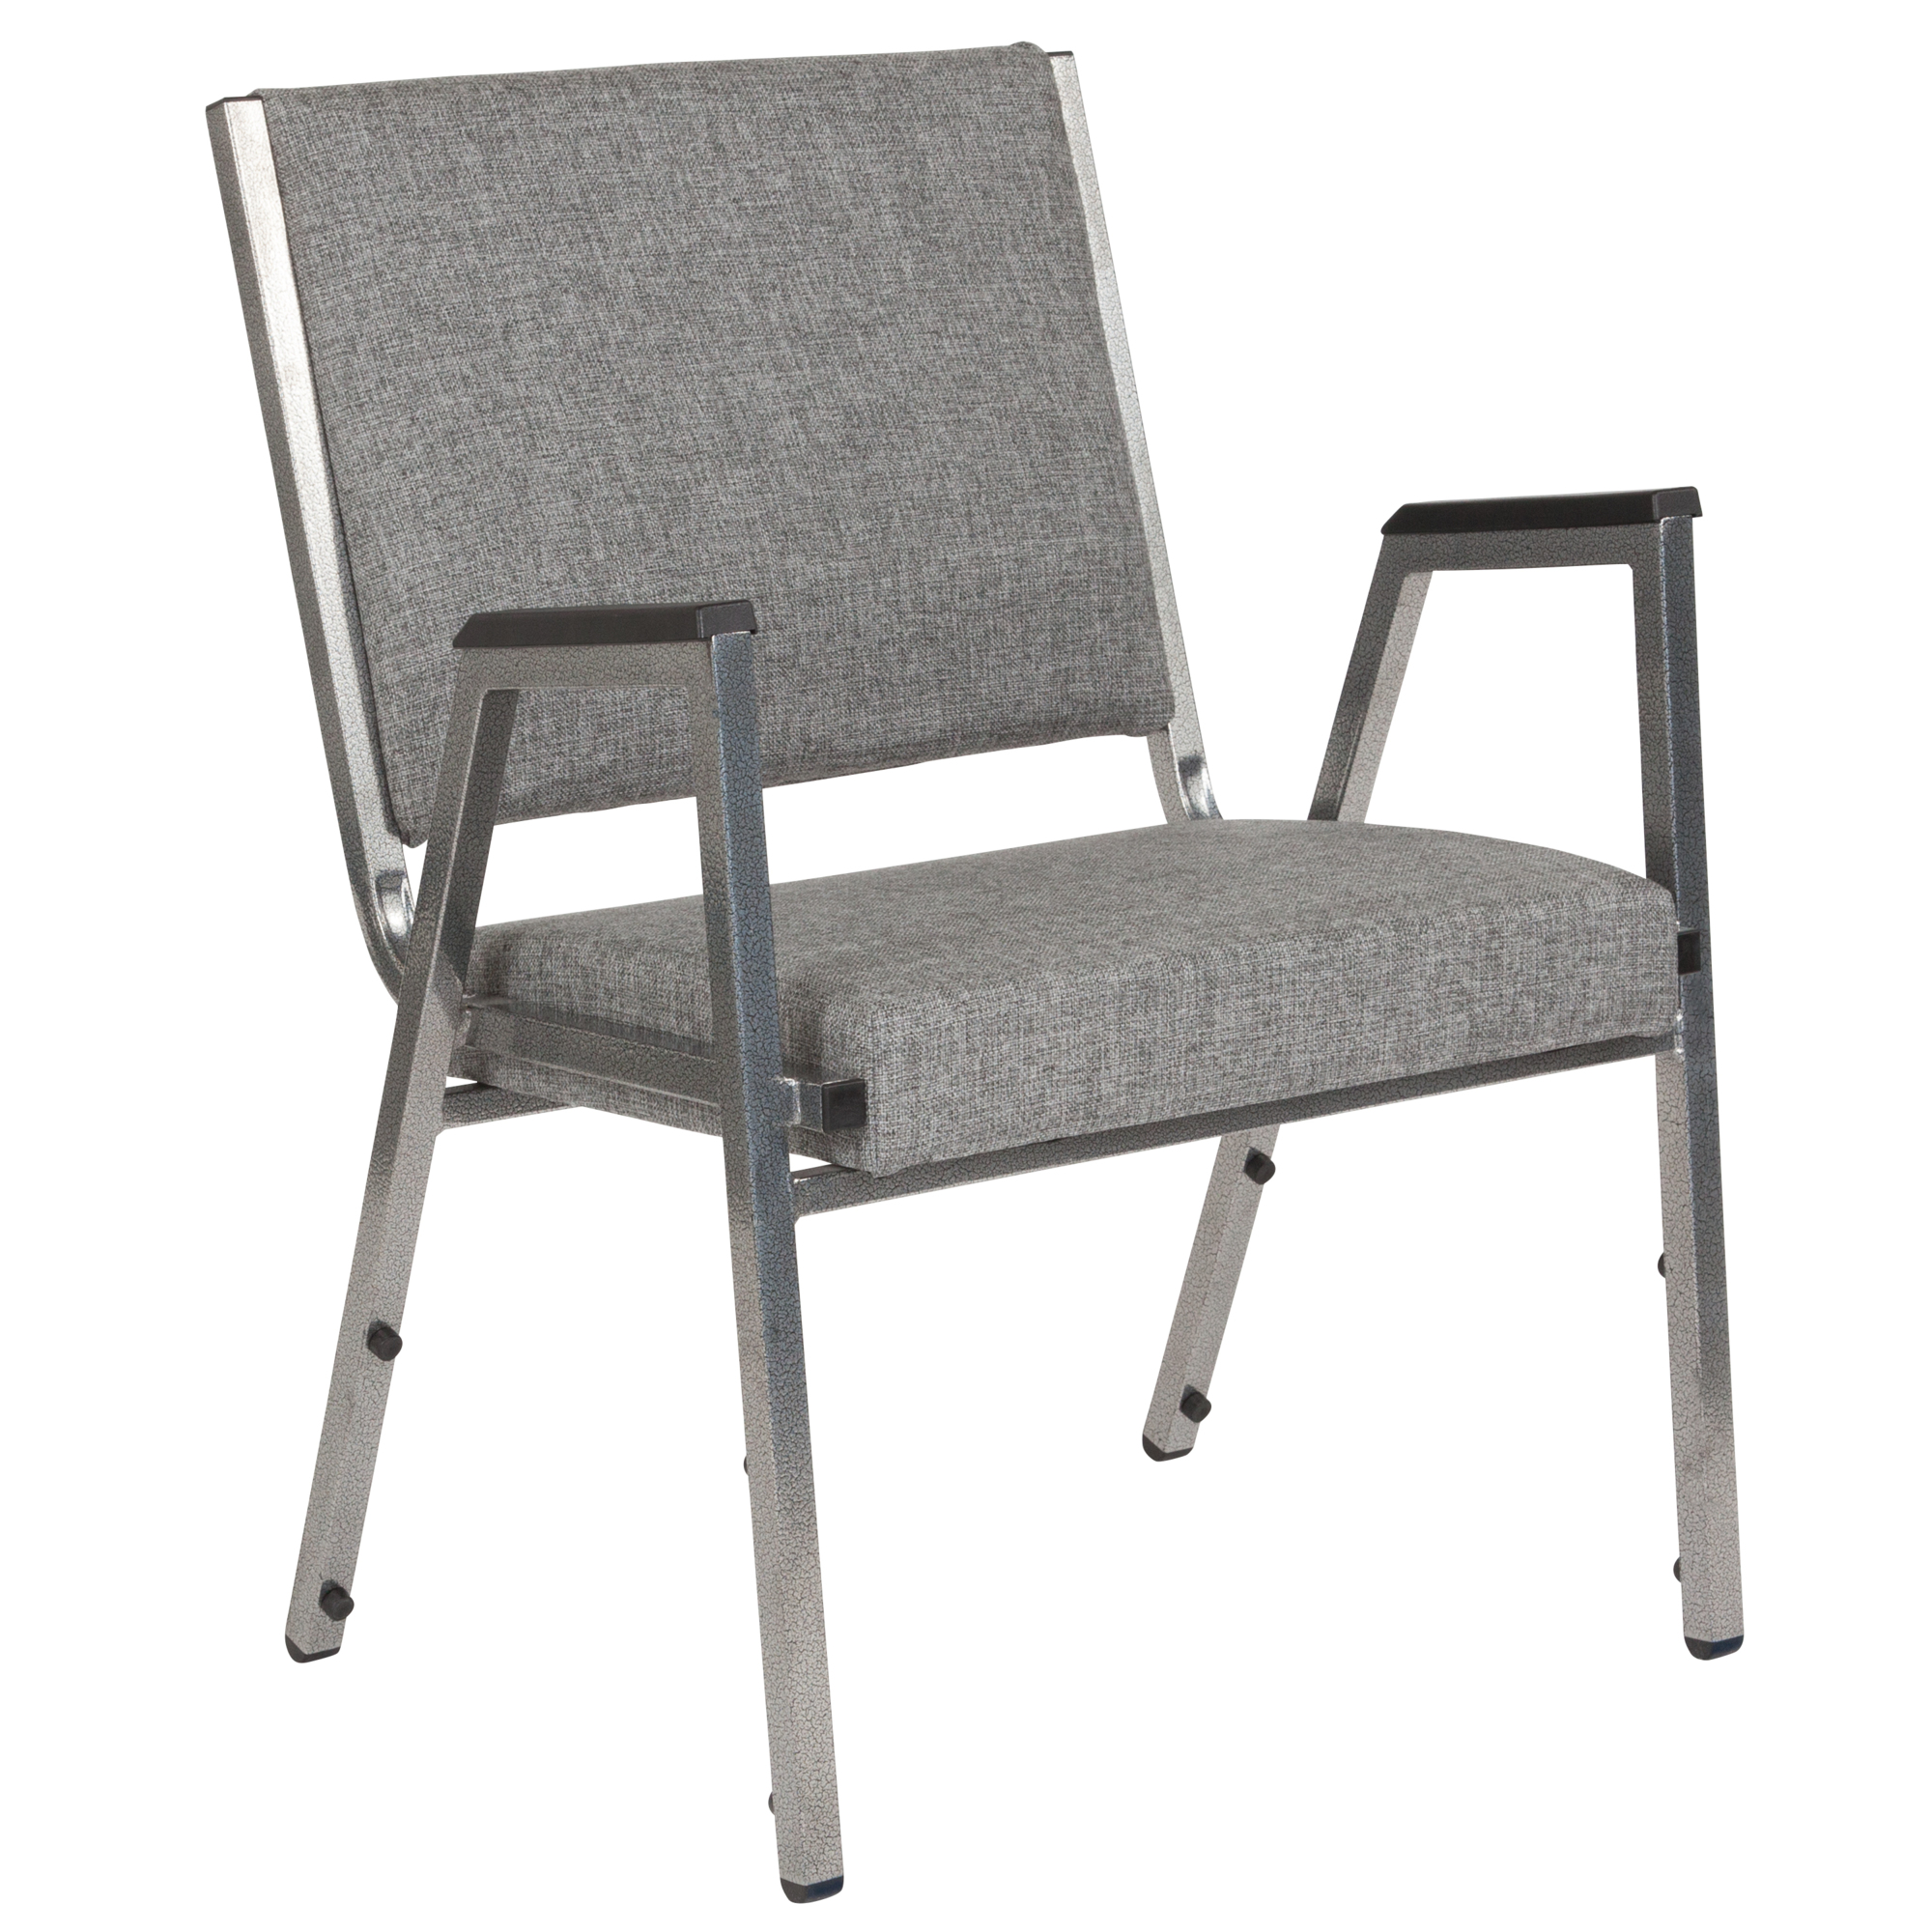 Flash Furniture, 1000 lb. Rated Gray Fabric Bariatric Arm Chair, Primary Color Gray, Included (qty.) 1, Model XU604436701GY